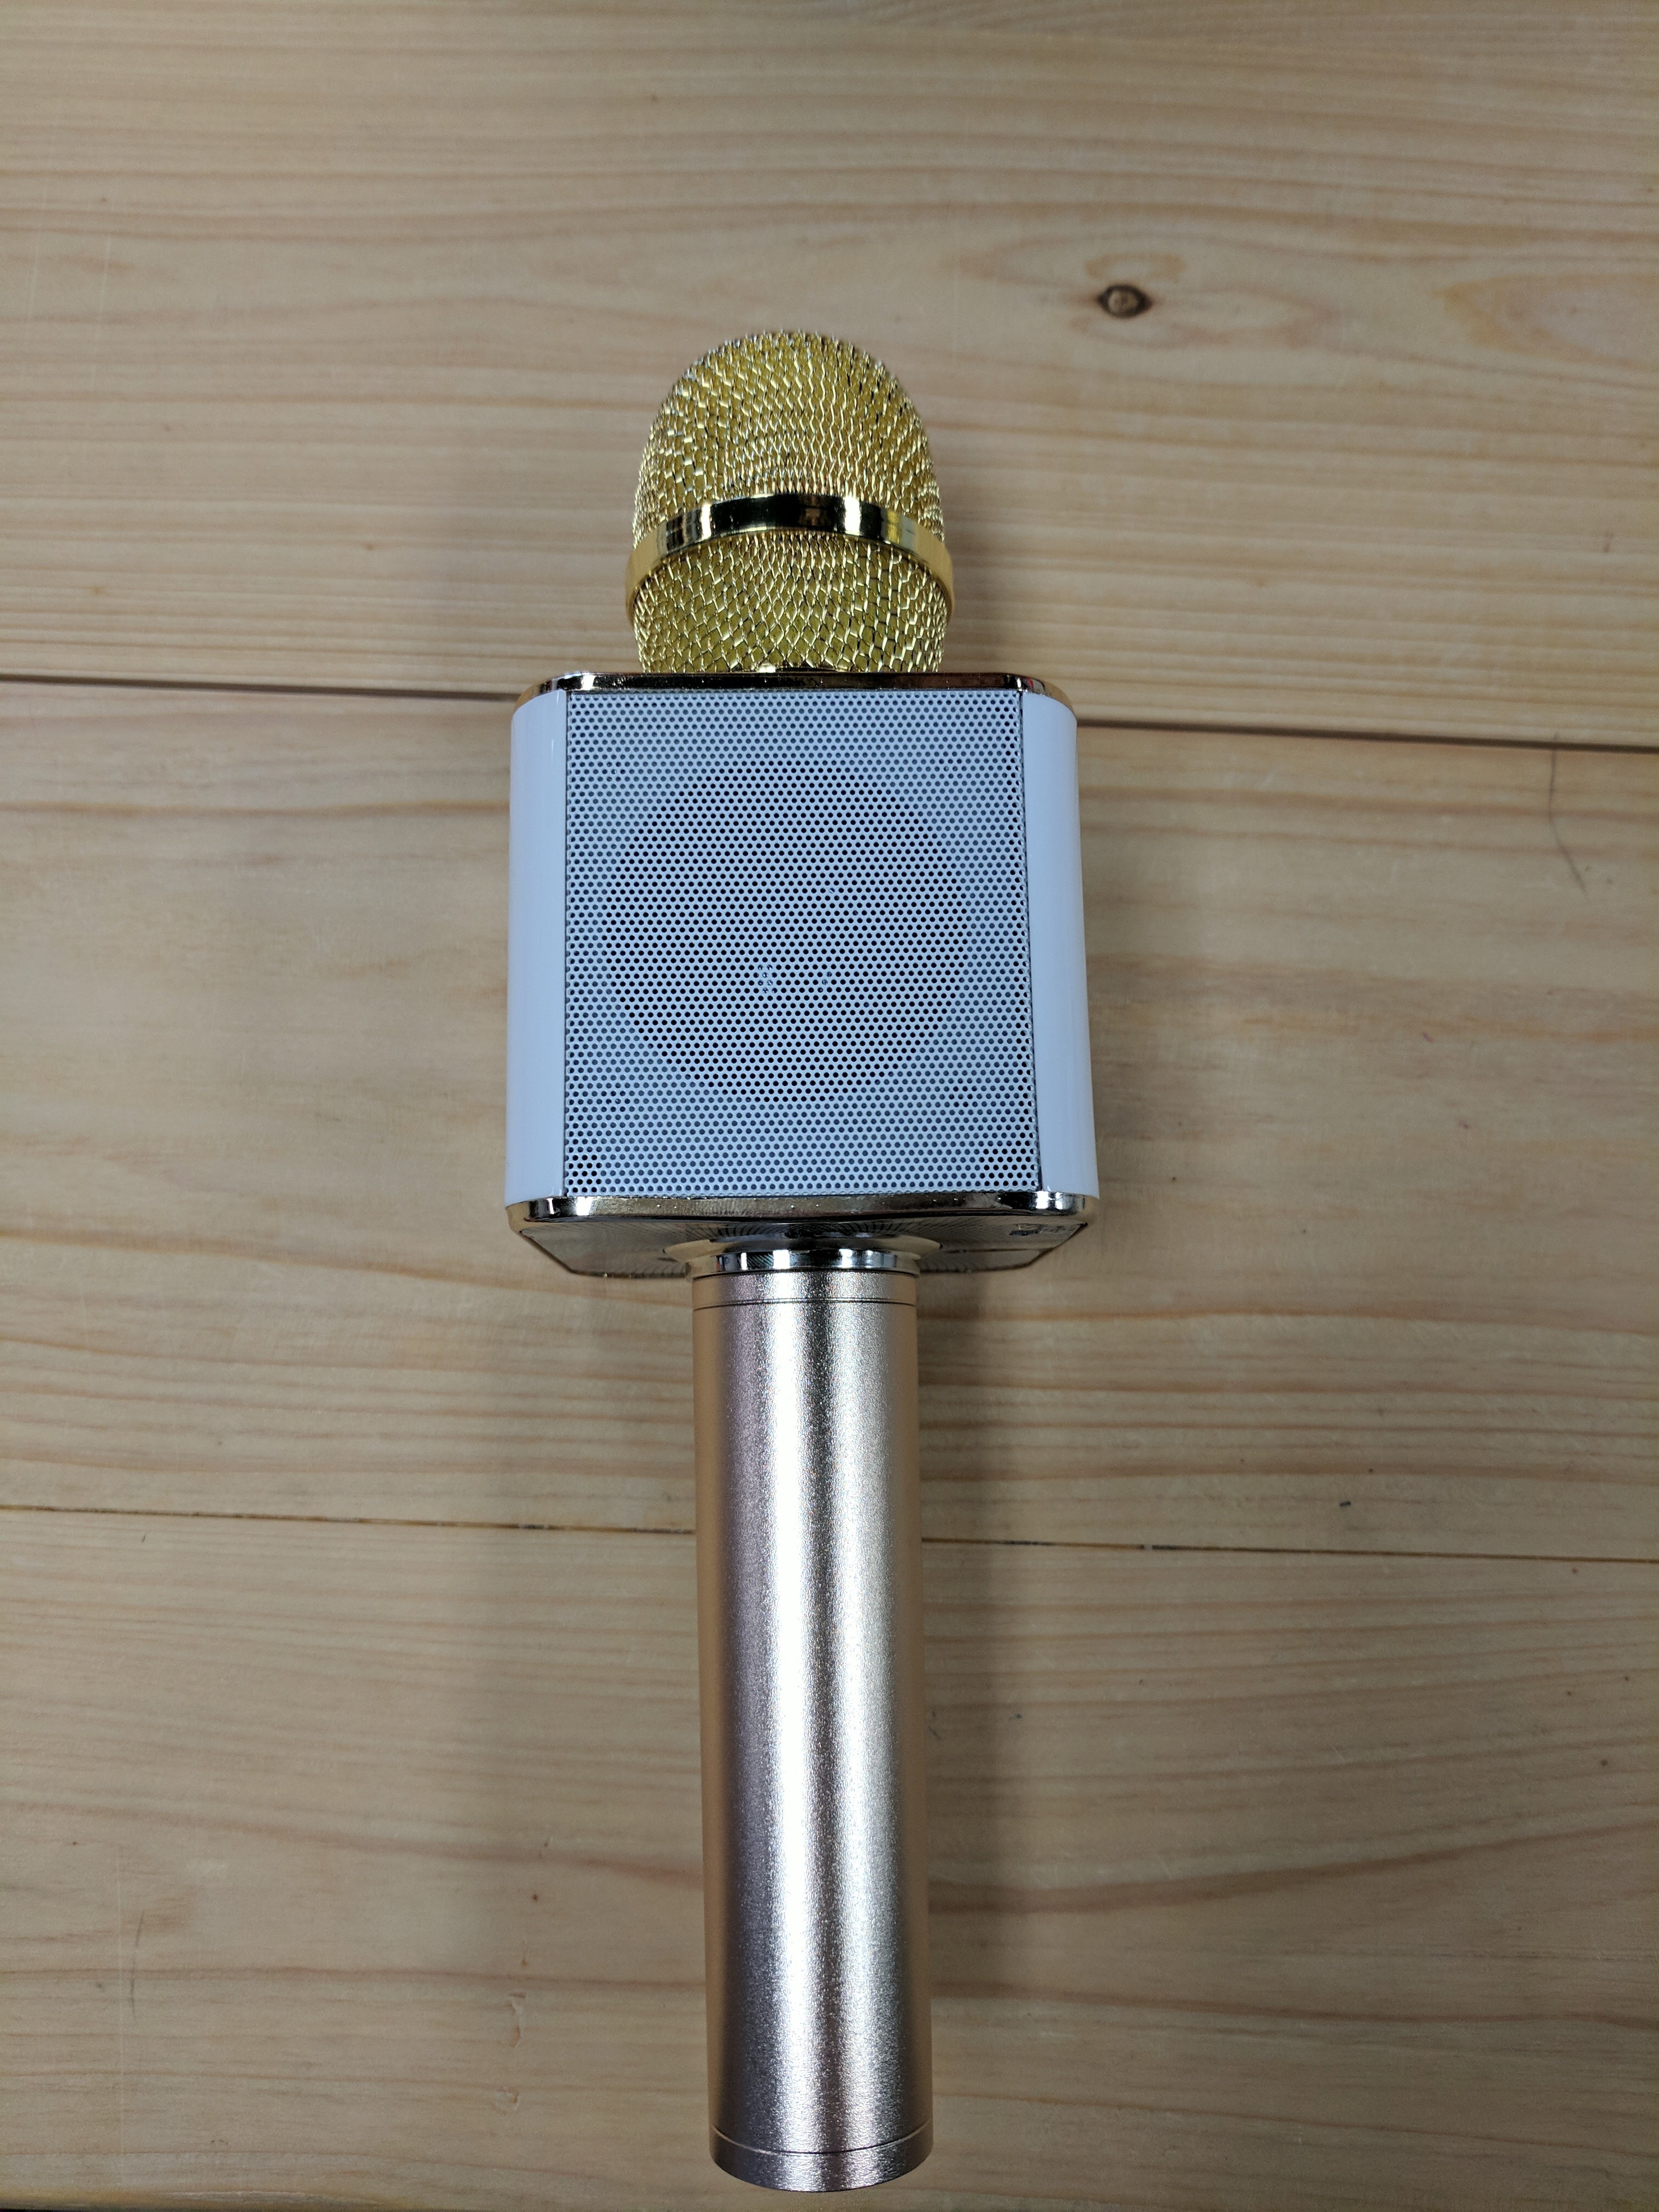 Blue Tooth Microphone With Speaker Rental - The Wedding Shop